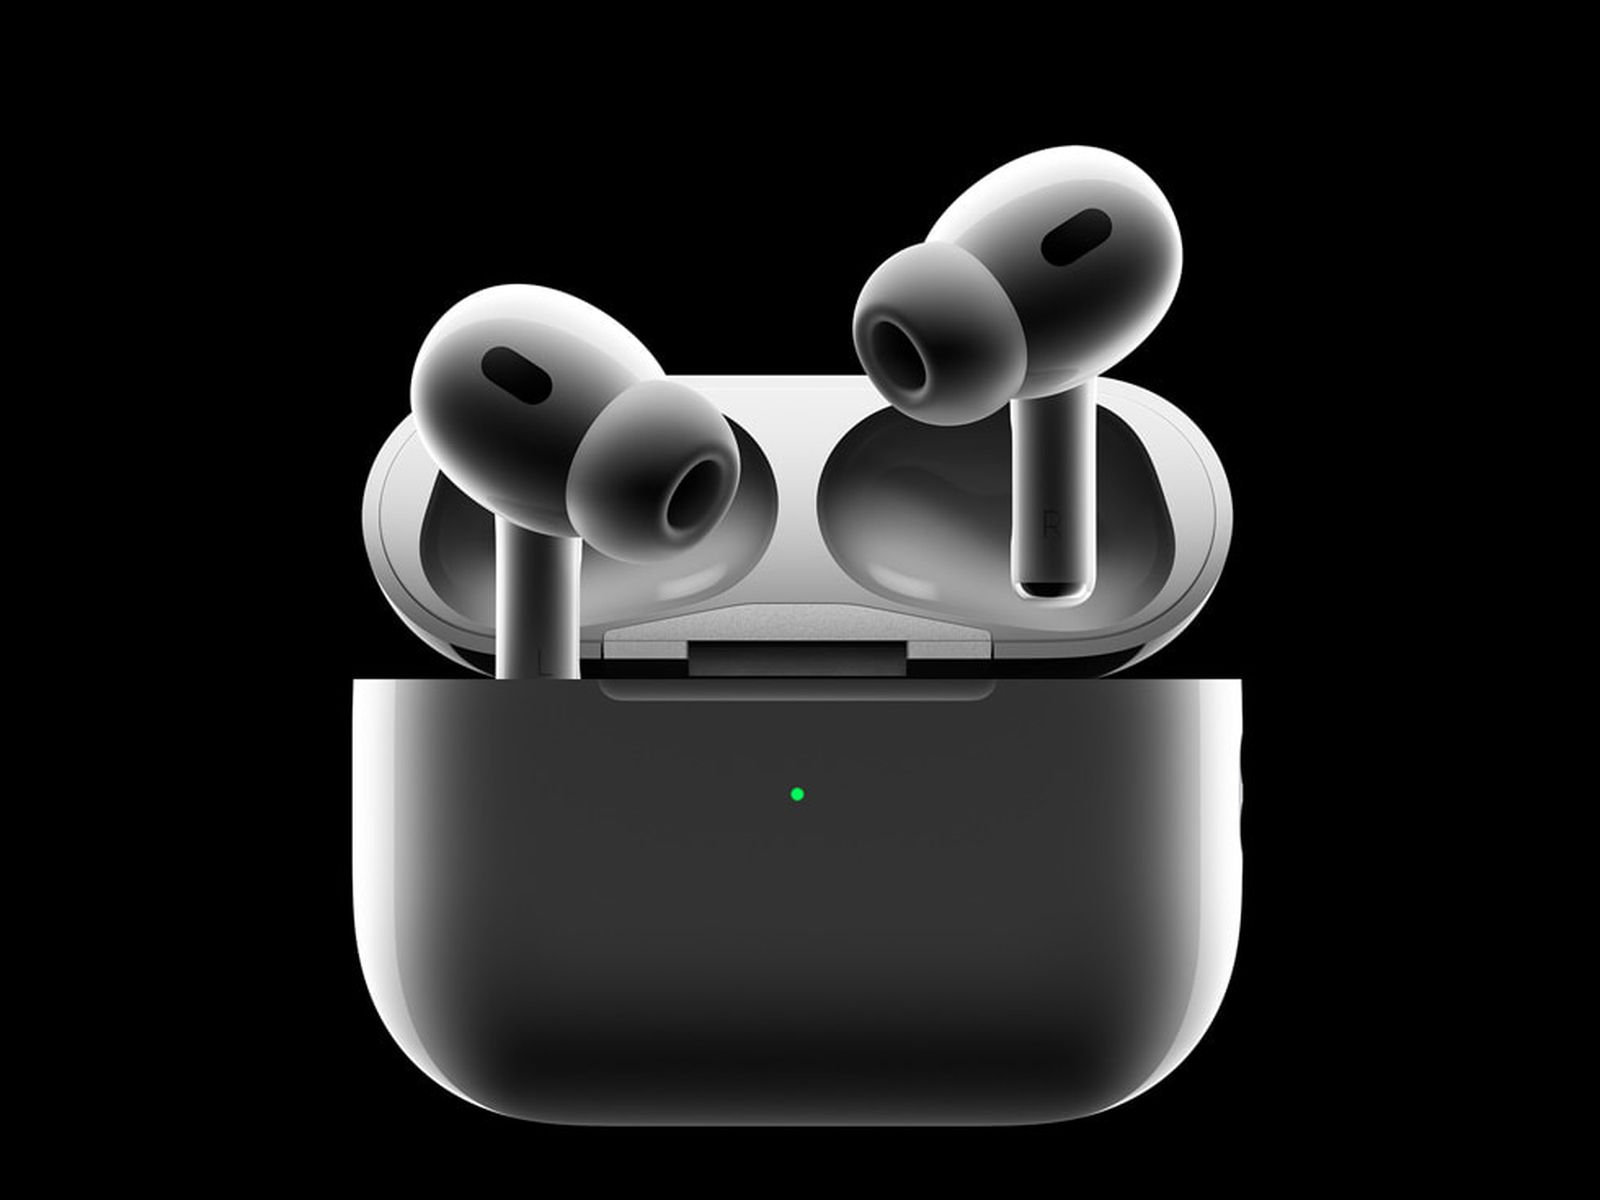 Apple Introduces Updated AirPods Pro and EarPods With USB-C and More -  MacRumors